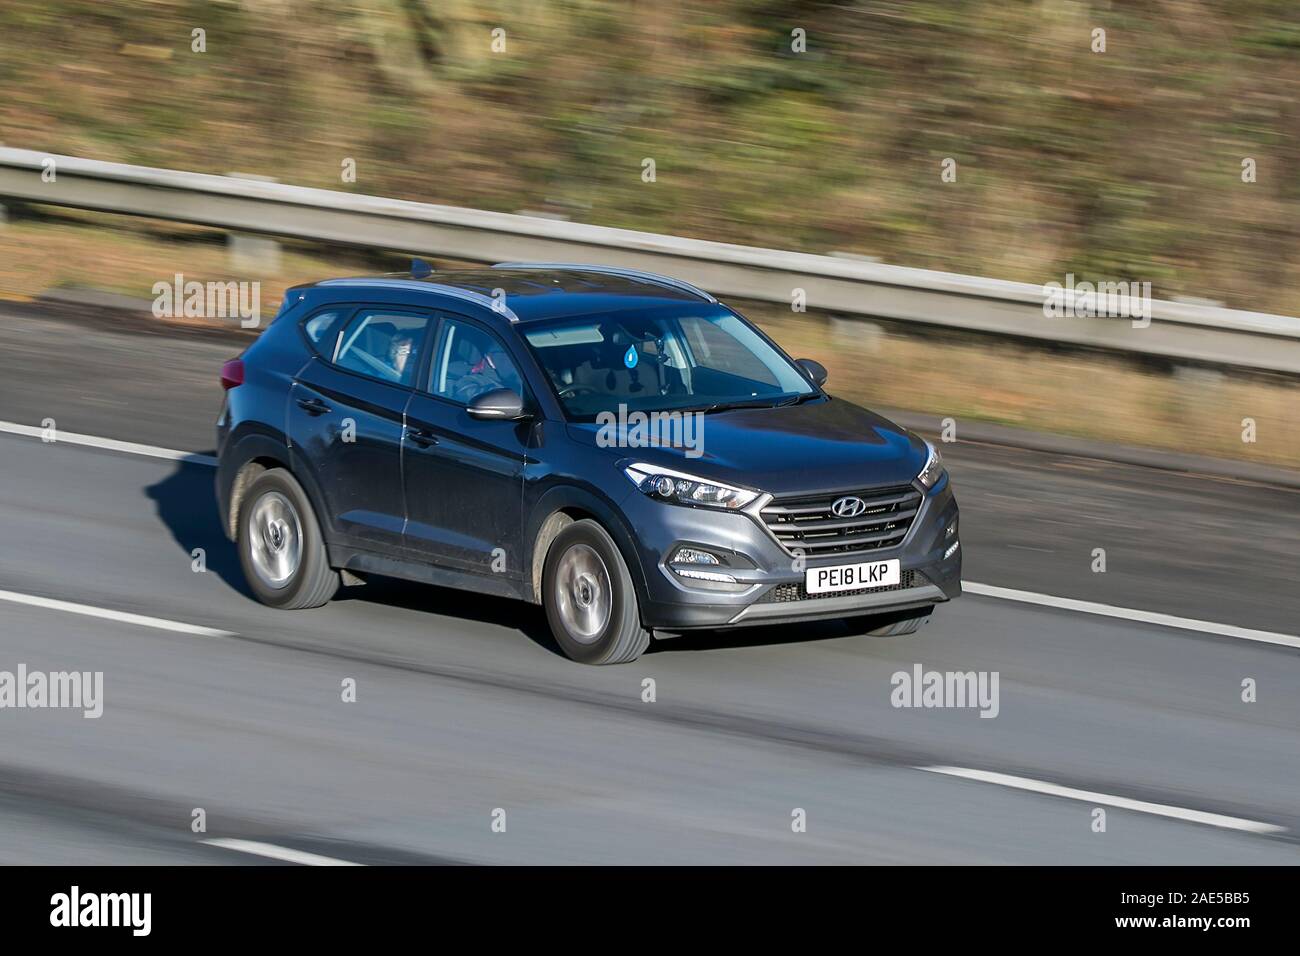 Blurred moving car HYUNDAI Tucson Se Nav B-Dr 2Wd traveling at speed on the M61 motorway Slow camera shutter speed vehicle movement Stock Photo